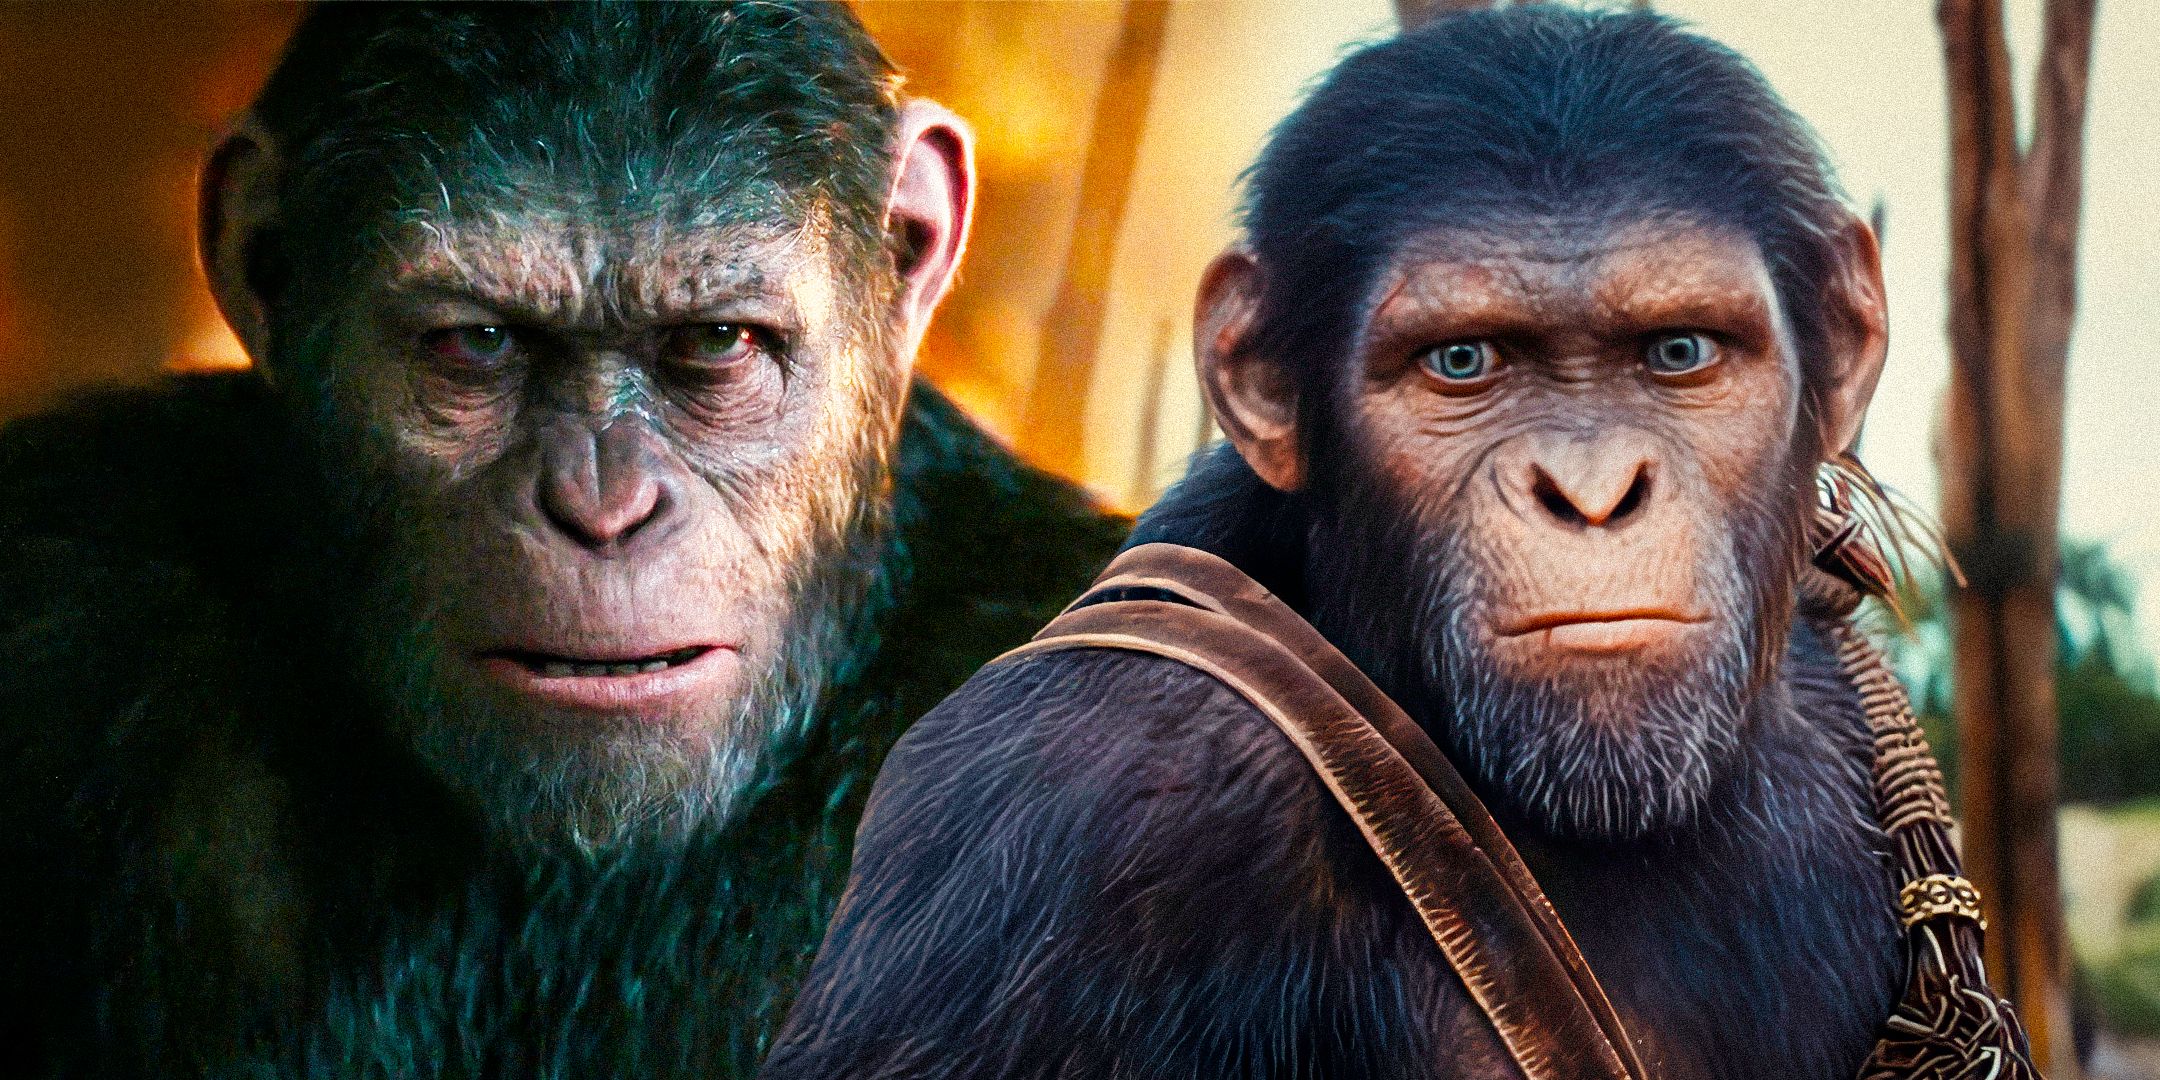 Noa-from-Kingdom-of-the-Planet-of-the-Apes-and-Andy-Serkis-as-Caesar